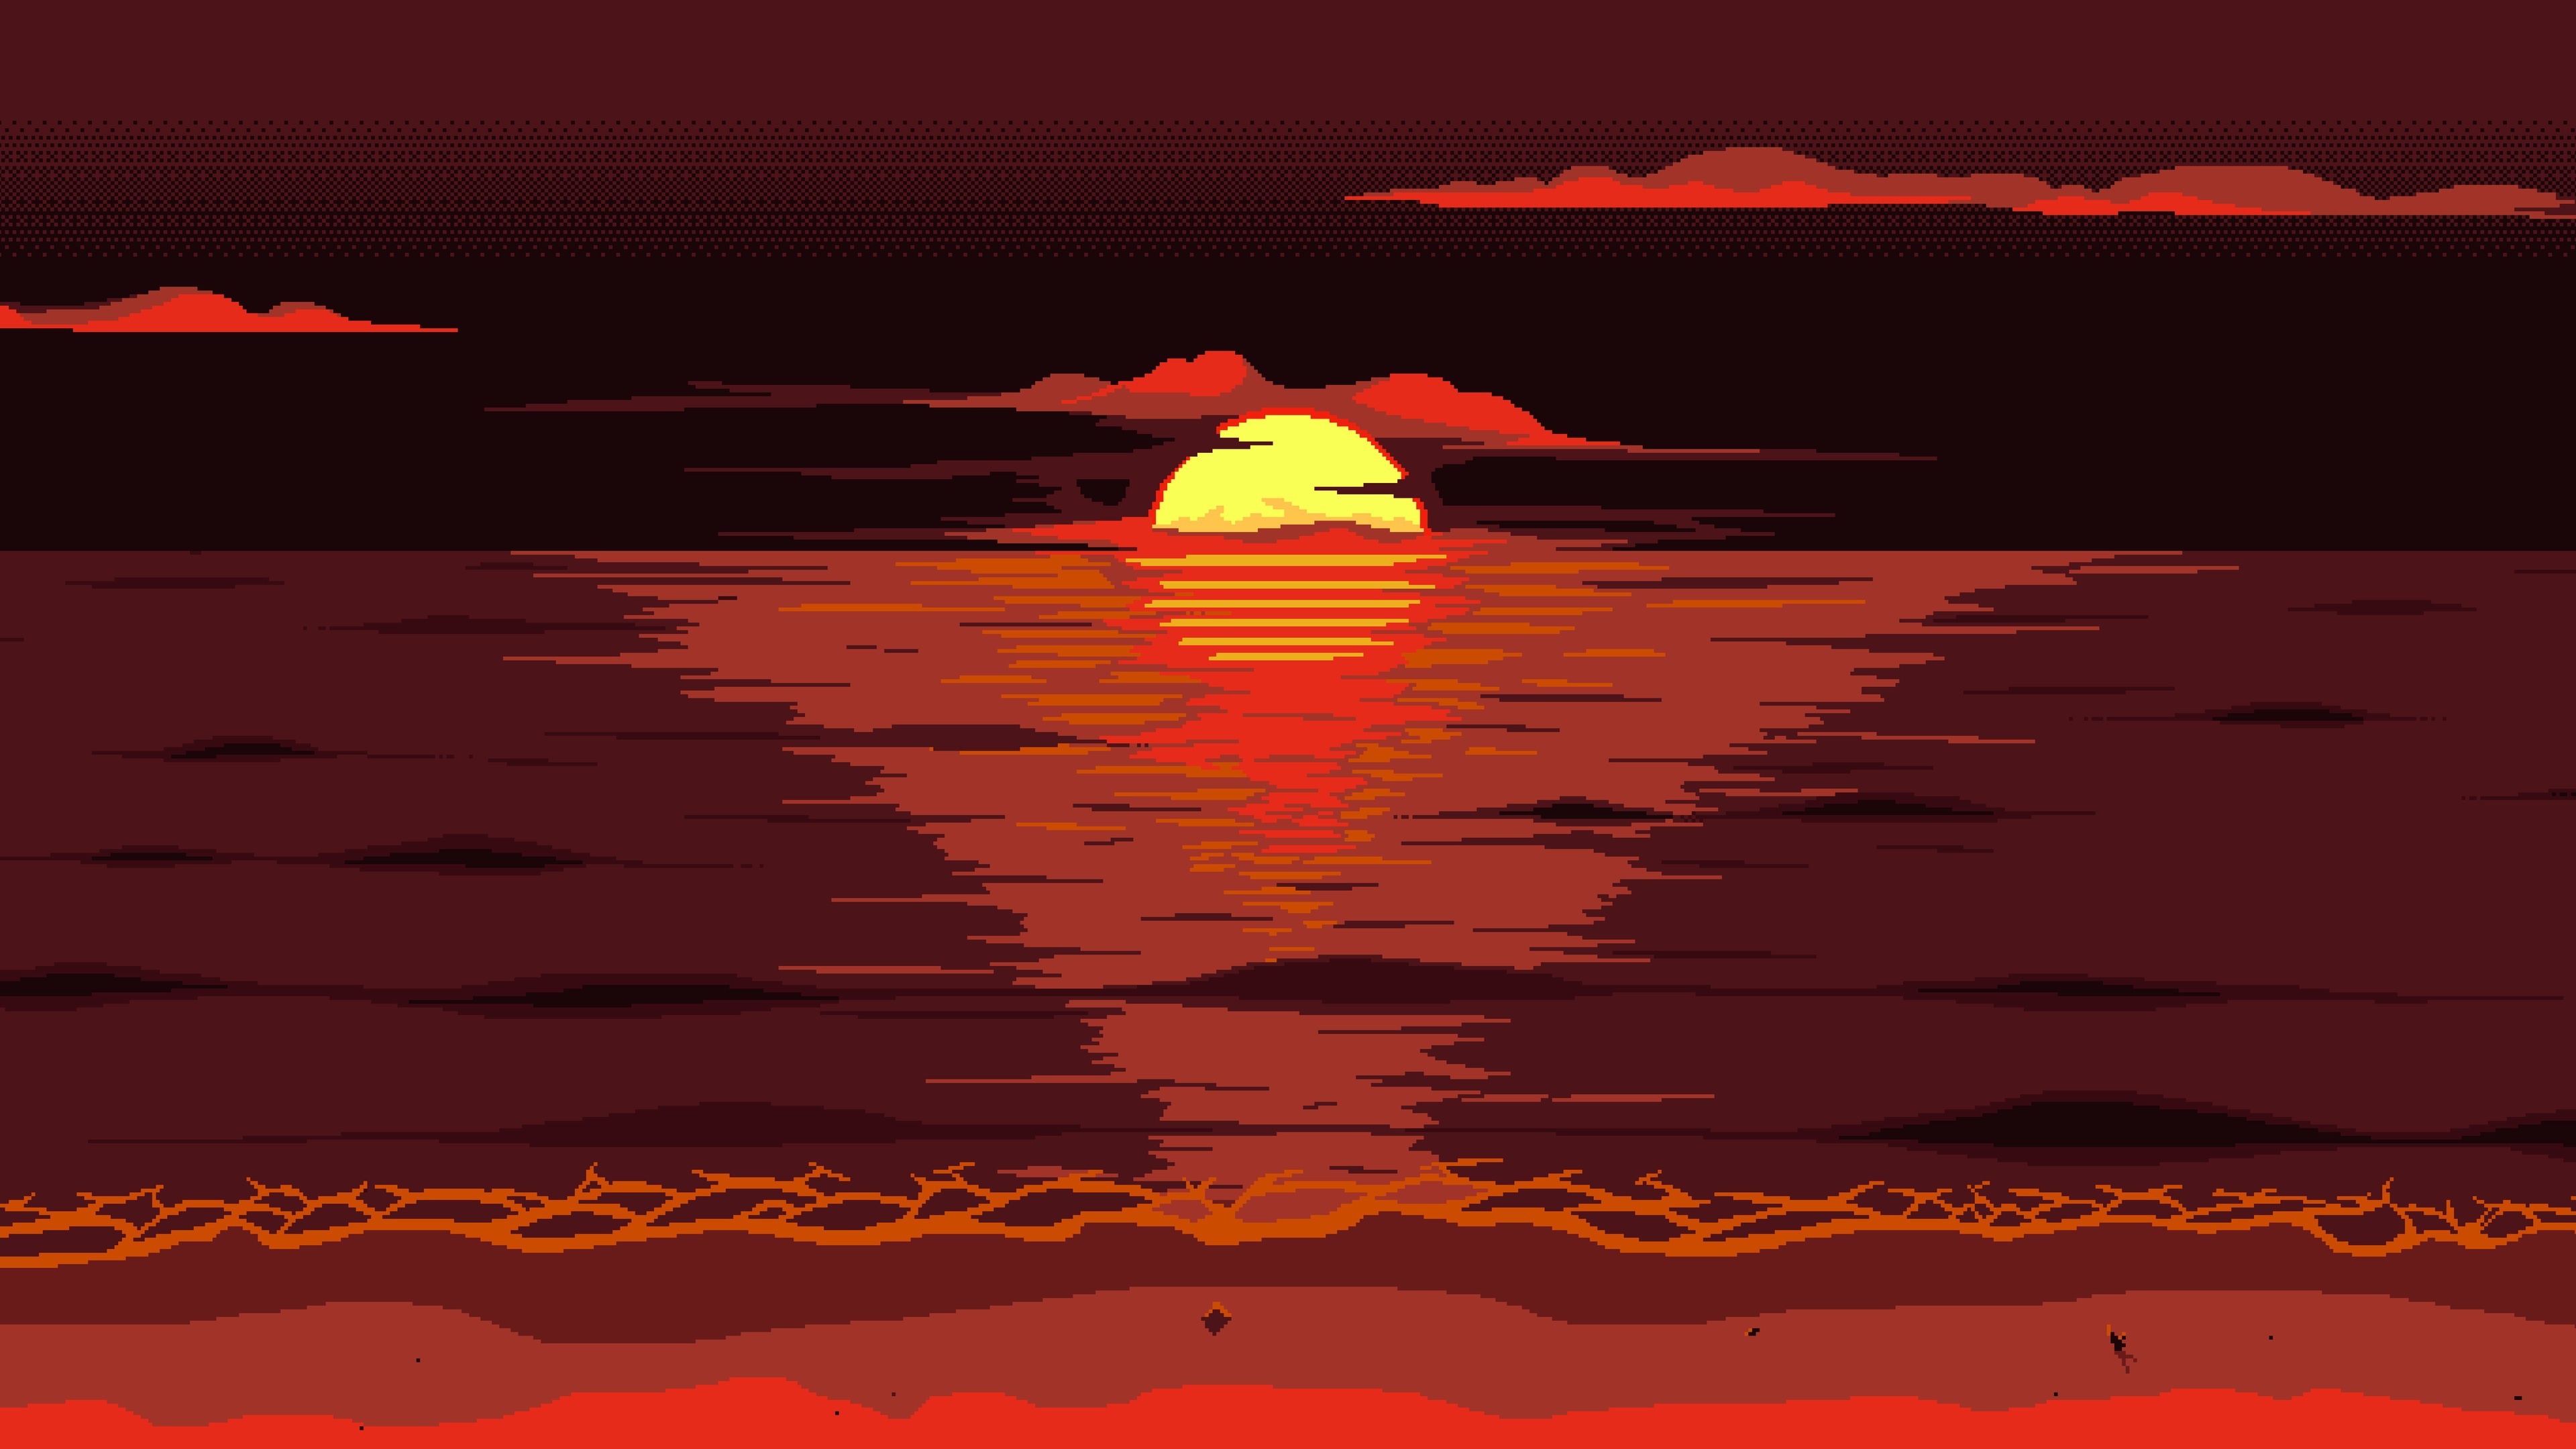 mountain sunset android pixel live wallpaper